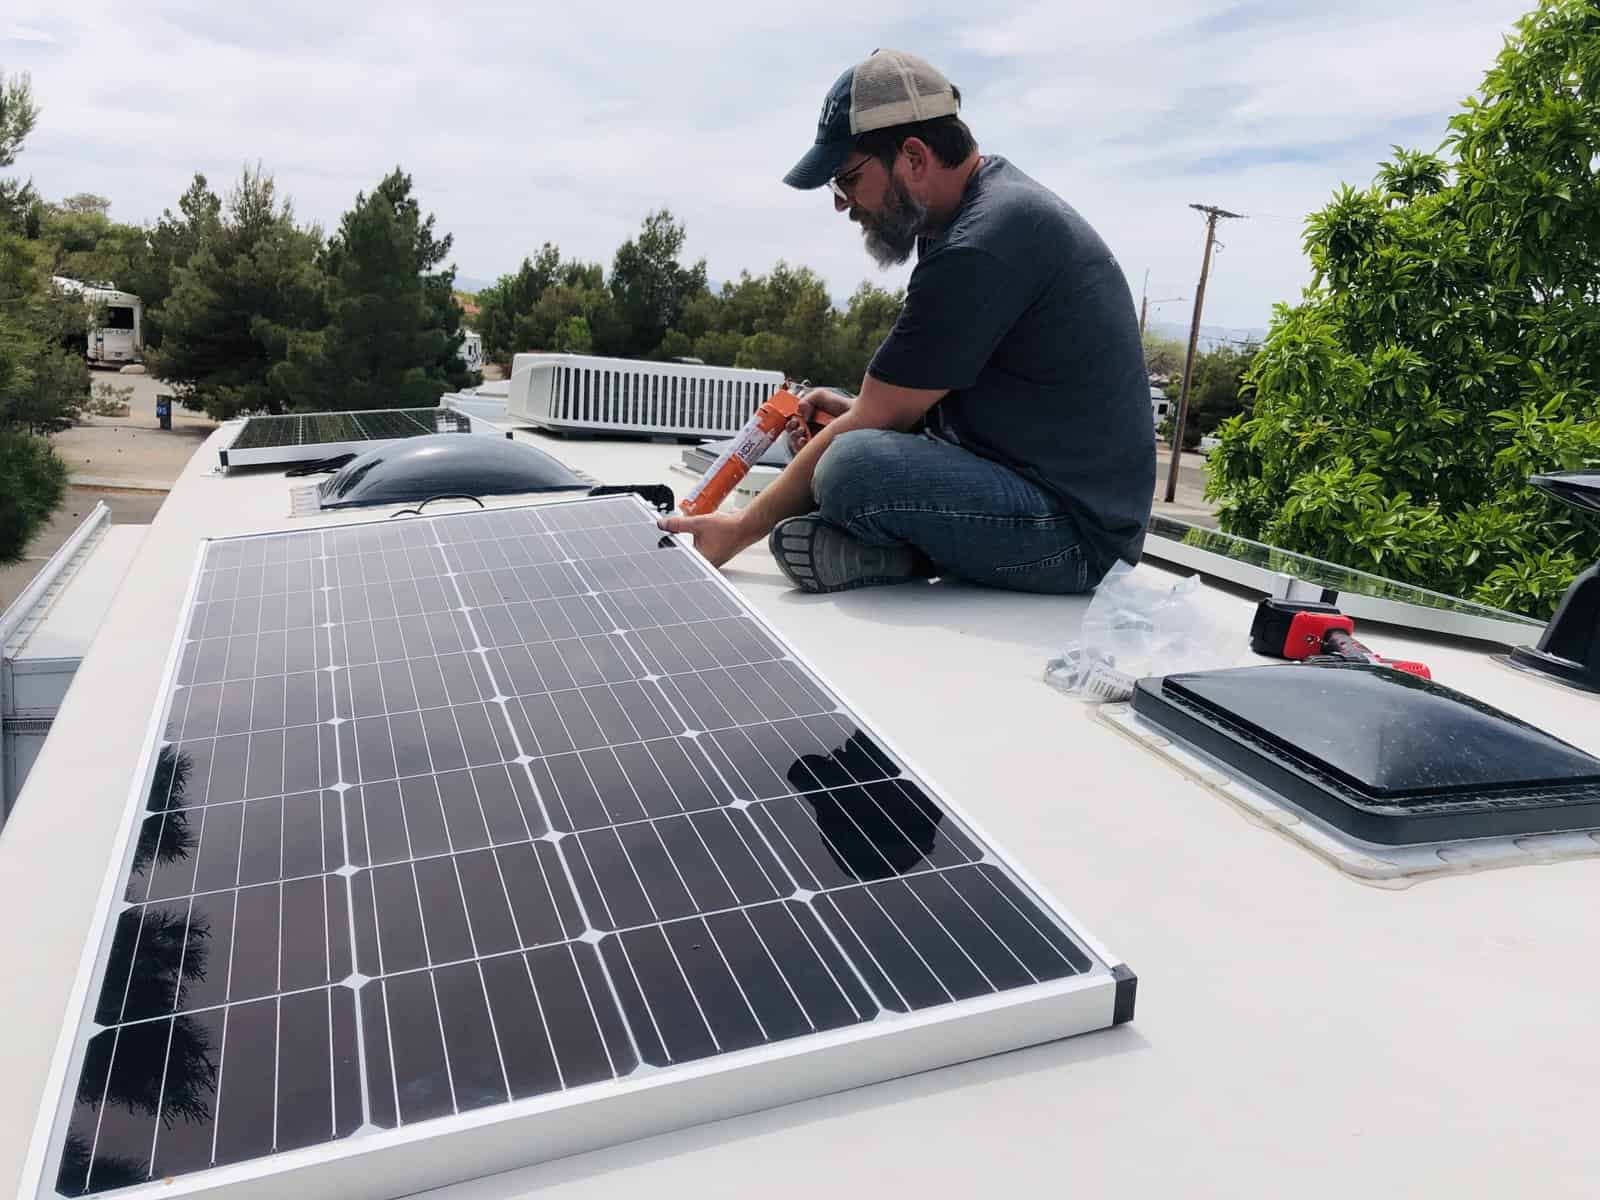 Sean did a total overhaul of the solar power system. (Image: @chickerystravels)